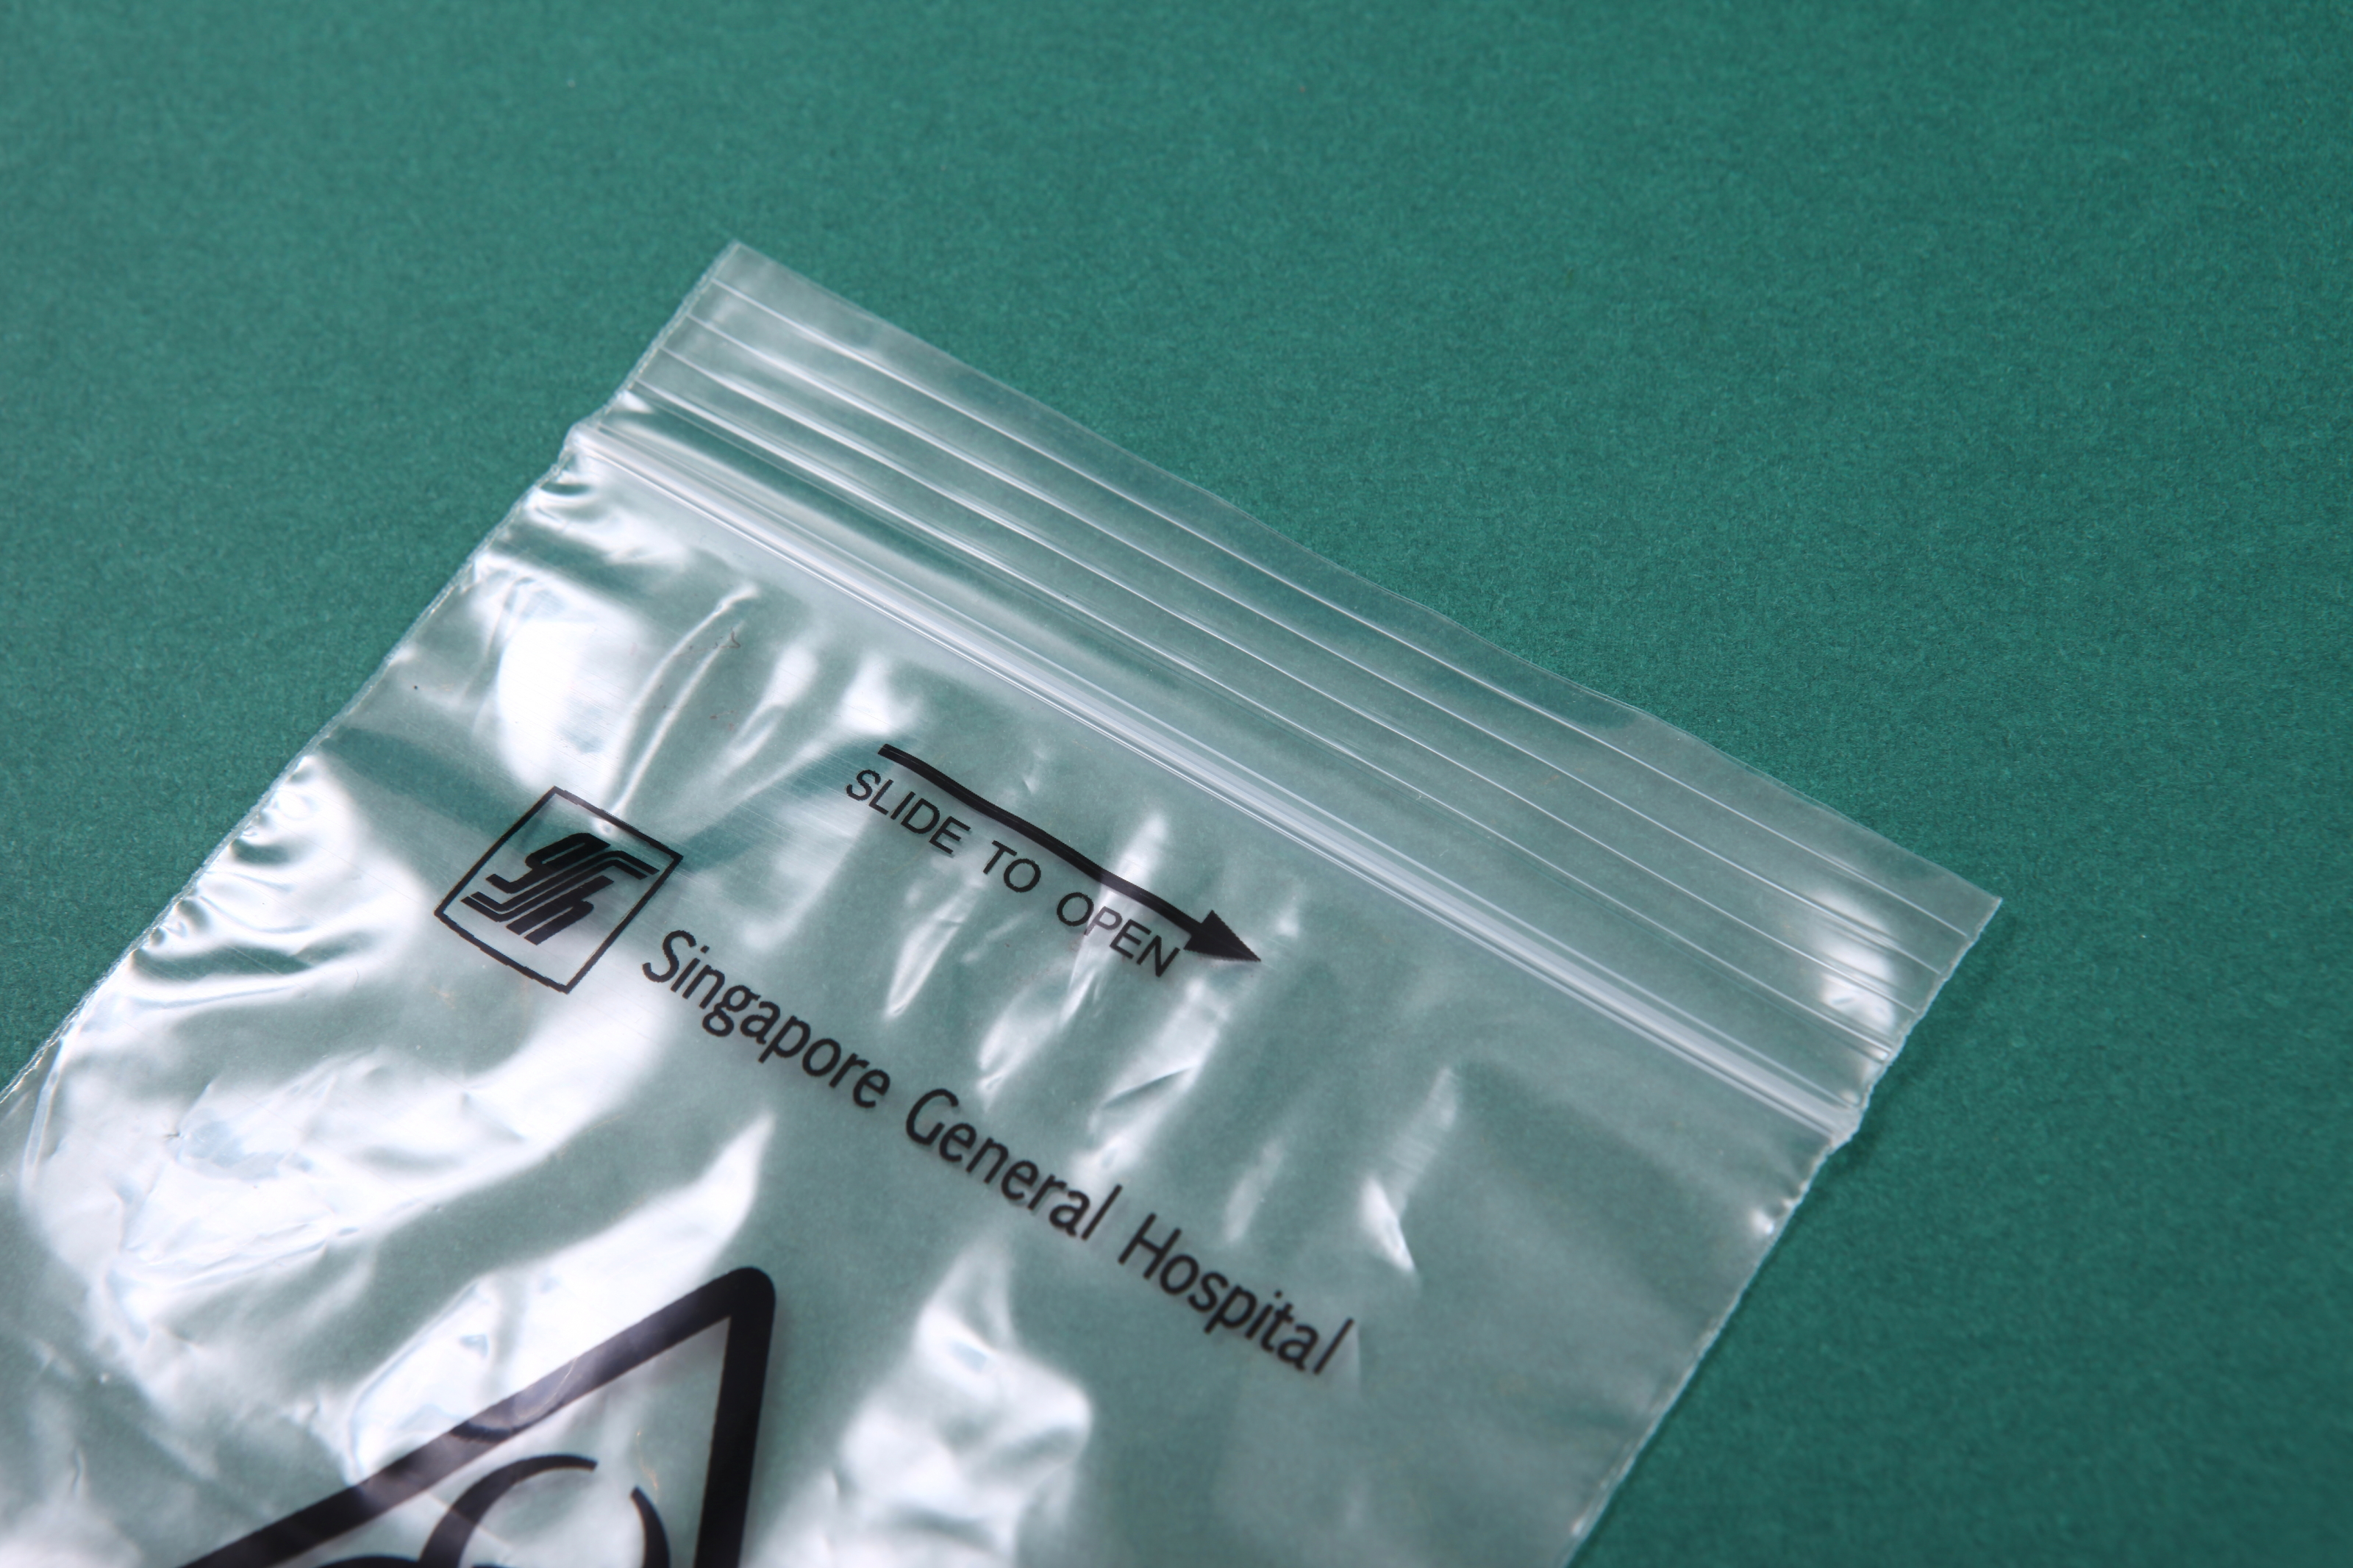 Get the Finest Quality Custom Printed Ziplock Bags at the Best Prices